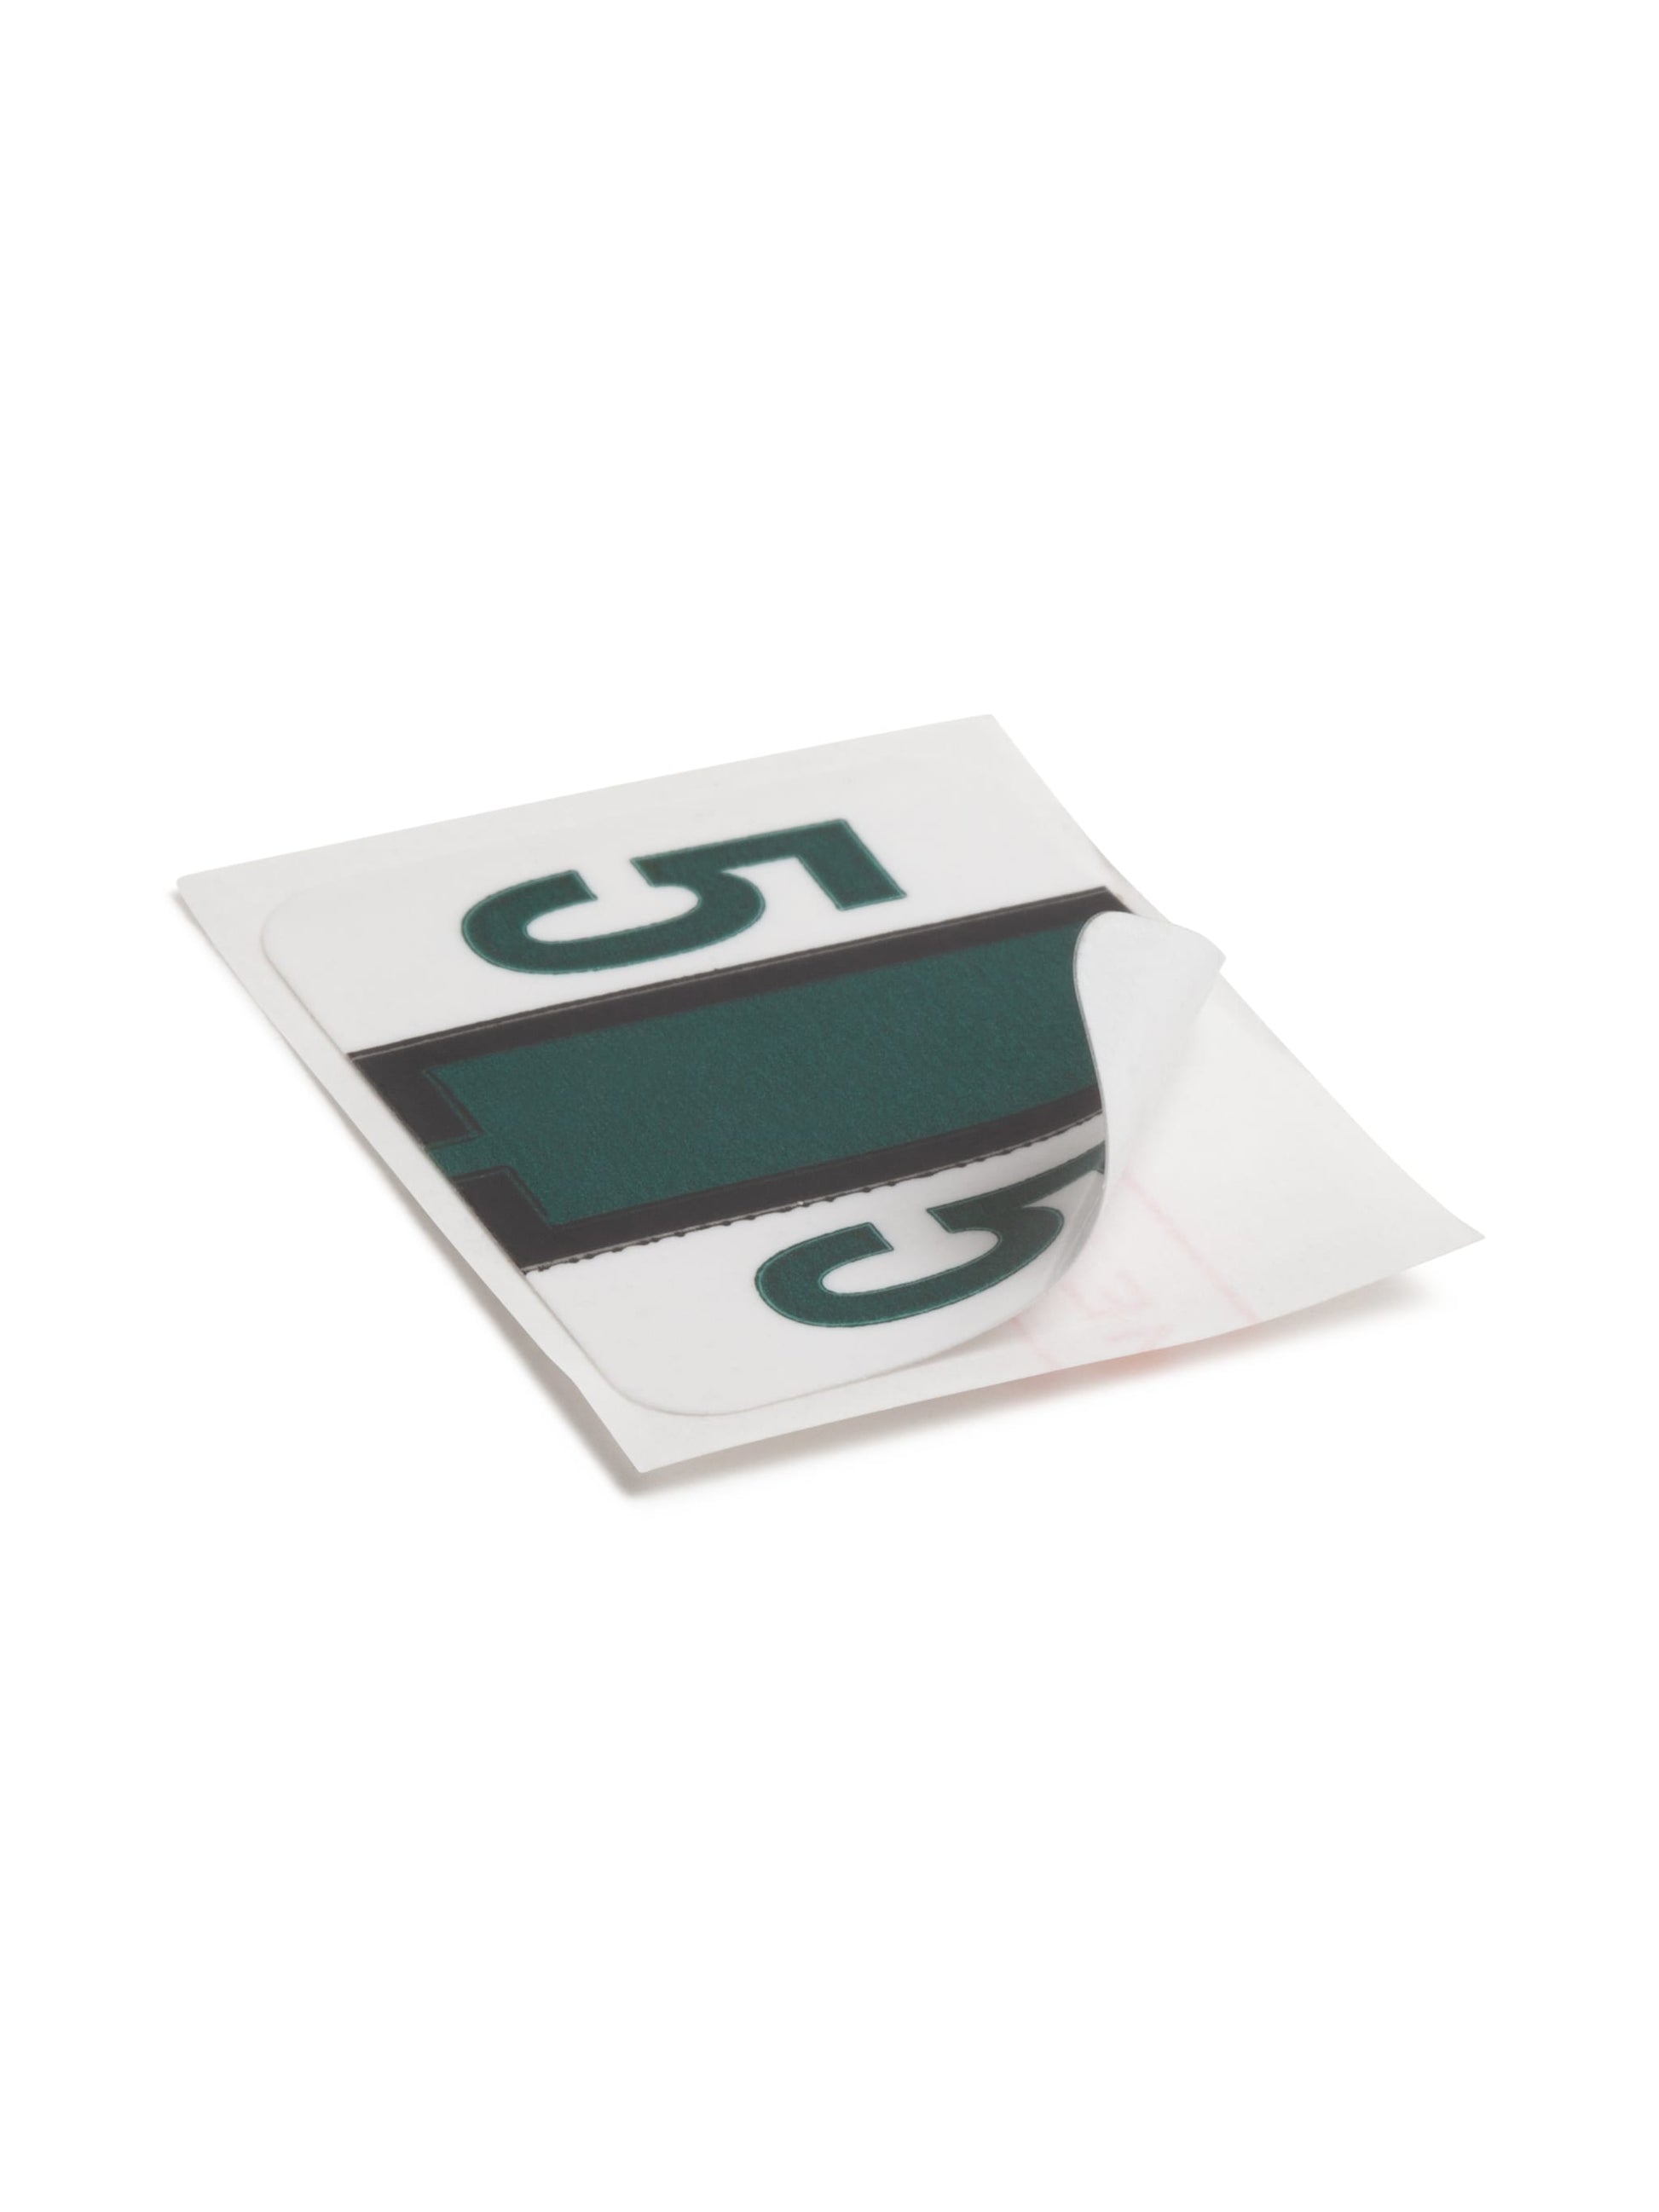 BCCRN Bar Style Color-Coded Numeric Labels, 0-9 Rolls, Dark Green Color, 1-1/4" X 1" Size, Set of 1, 086486673754